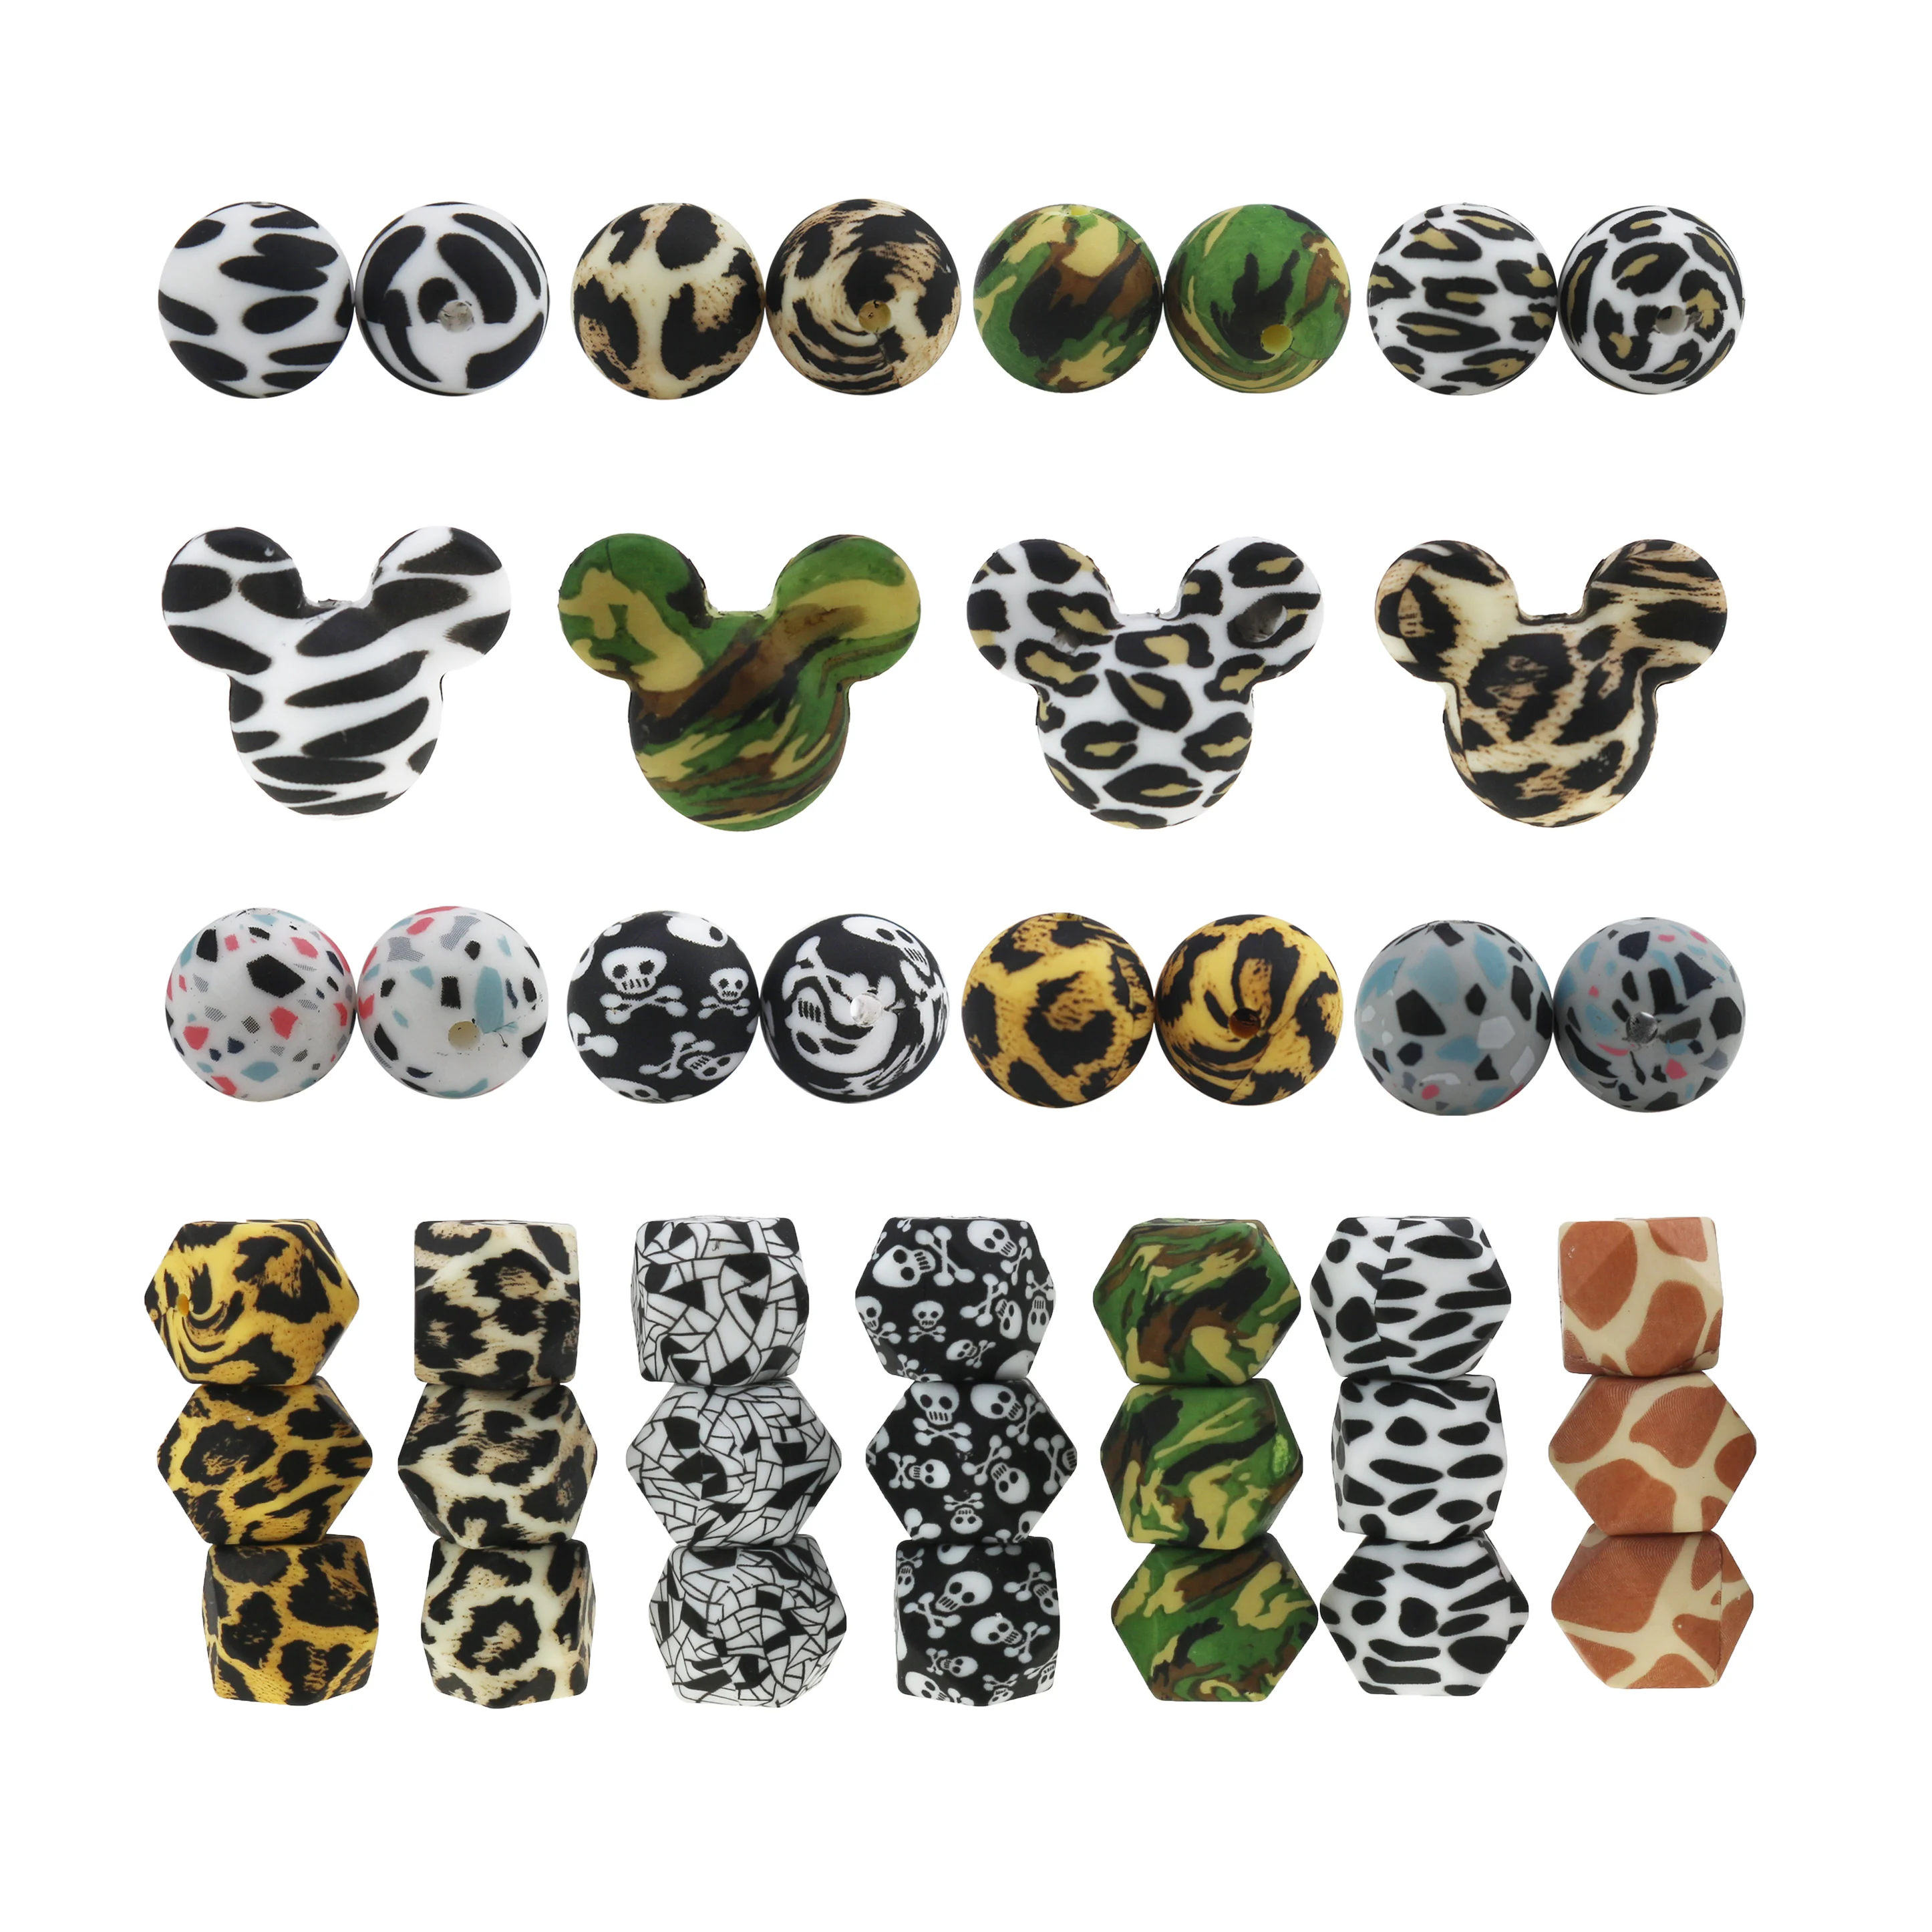 

Wholesale Food Grade BPA Free Soft Baby Teether Toys 12mm 15MM Leopard Printing Mickey Loose silicone beads teething